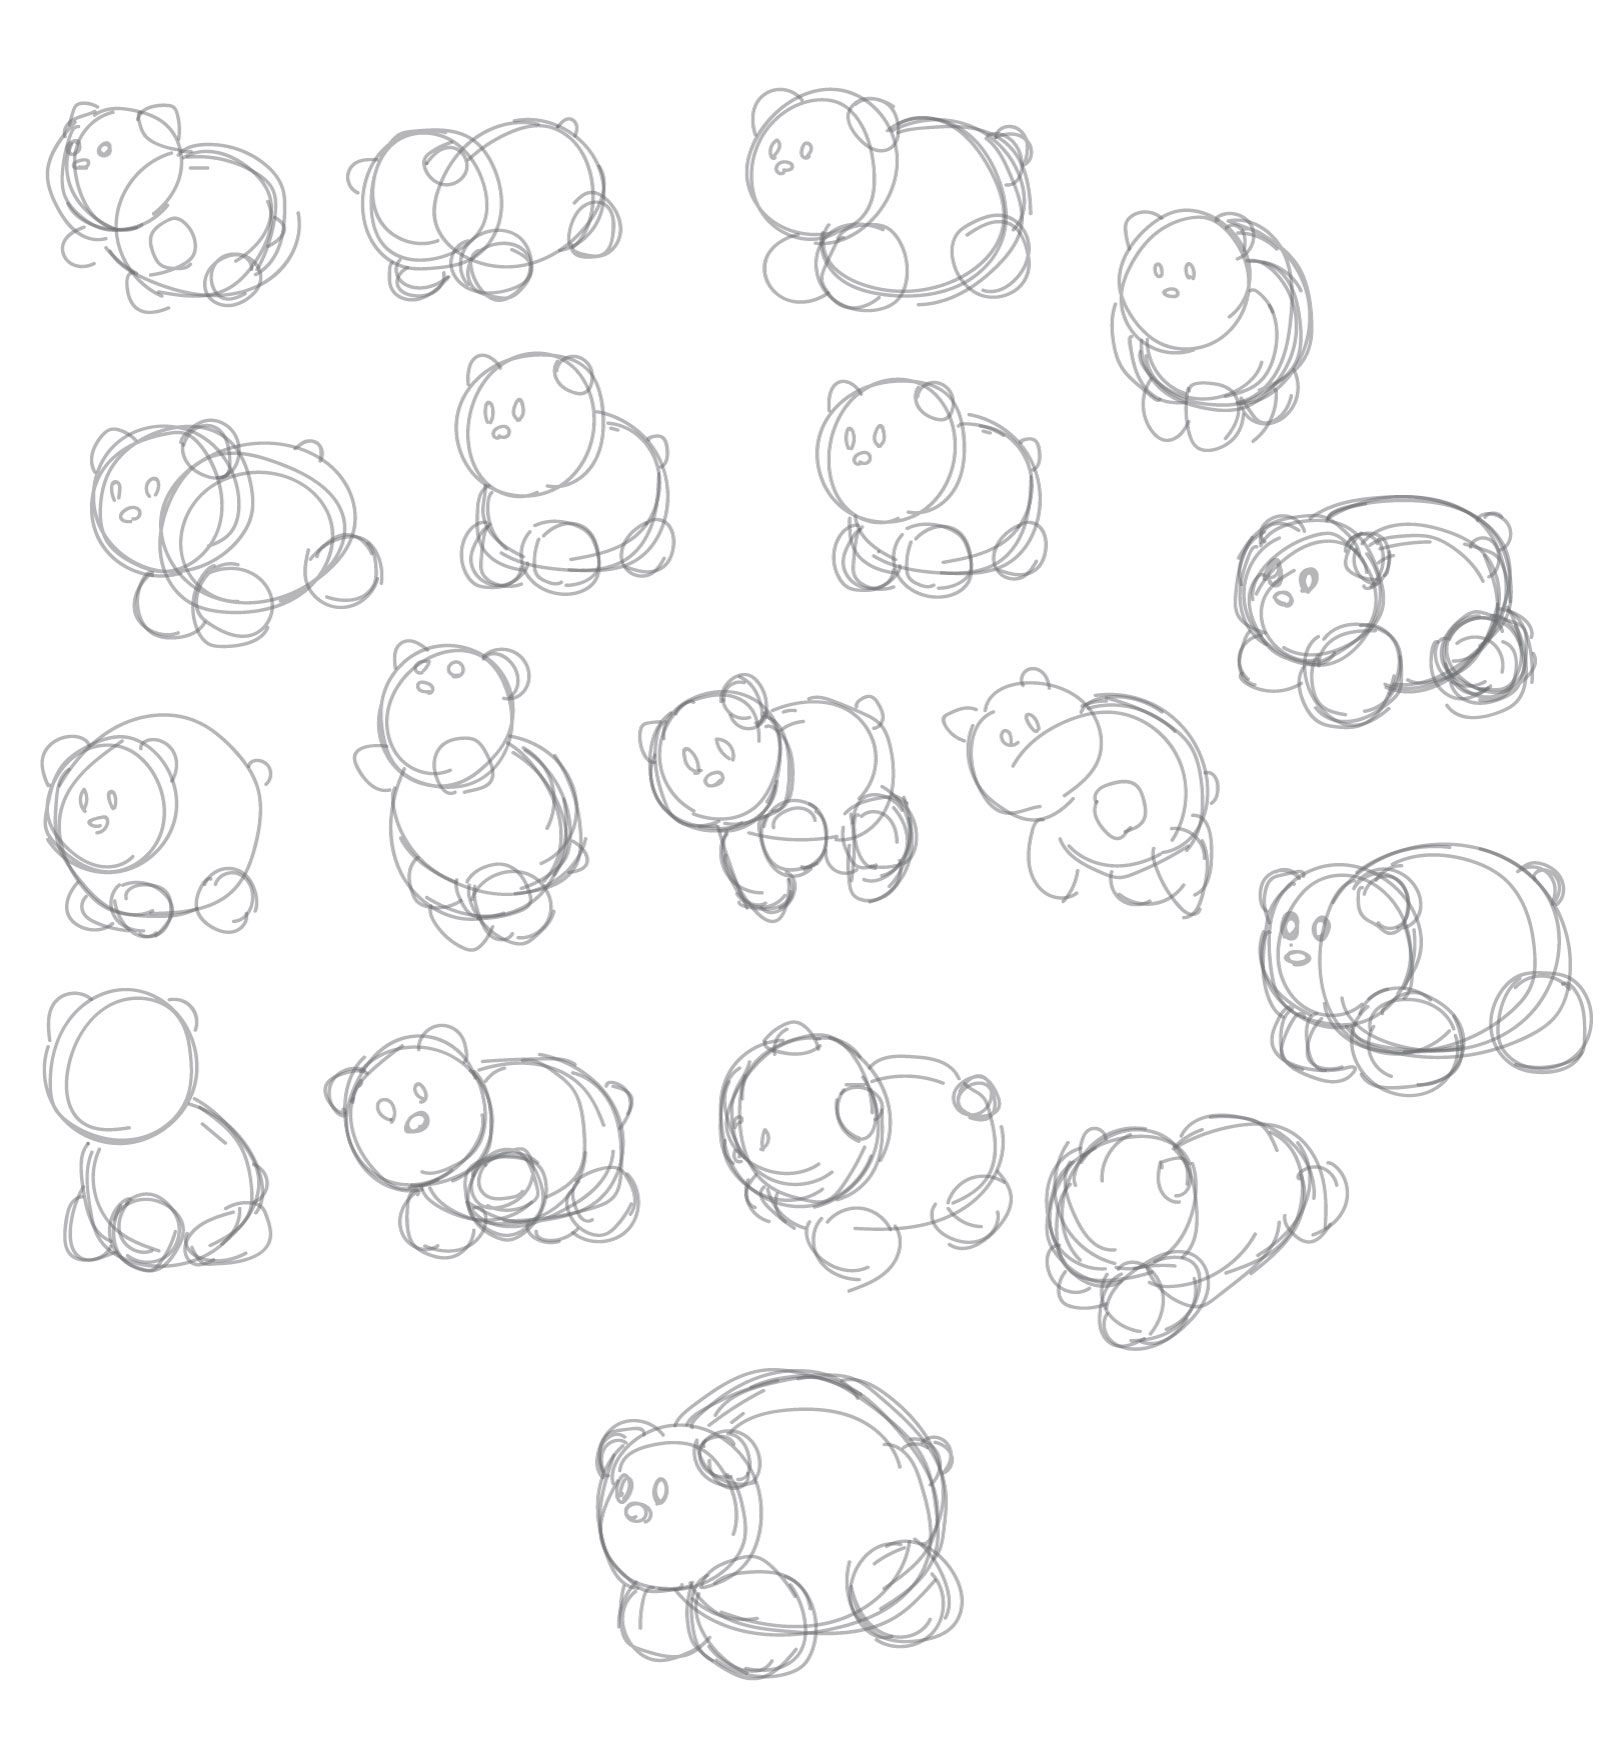 Several sketches of the water bear in different poses